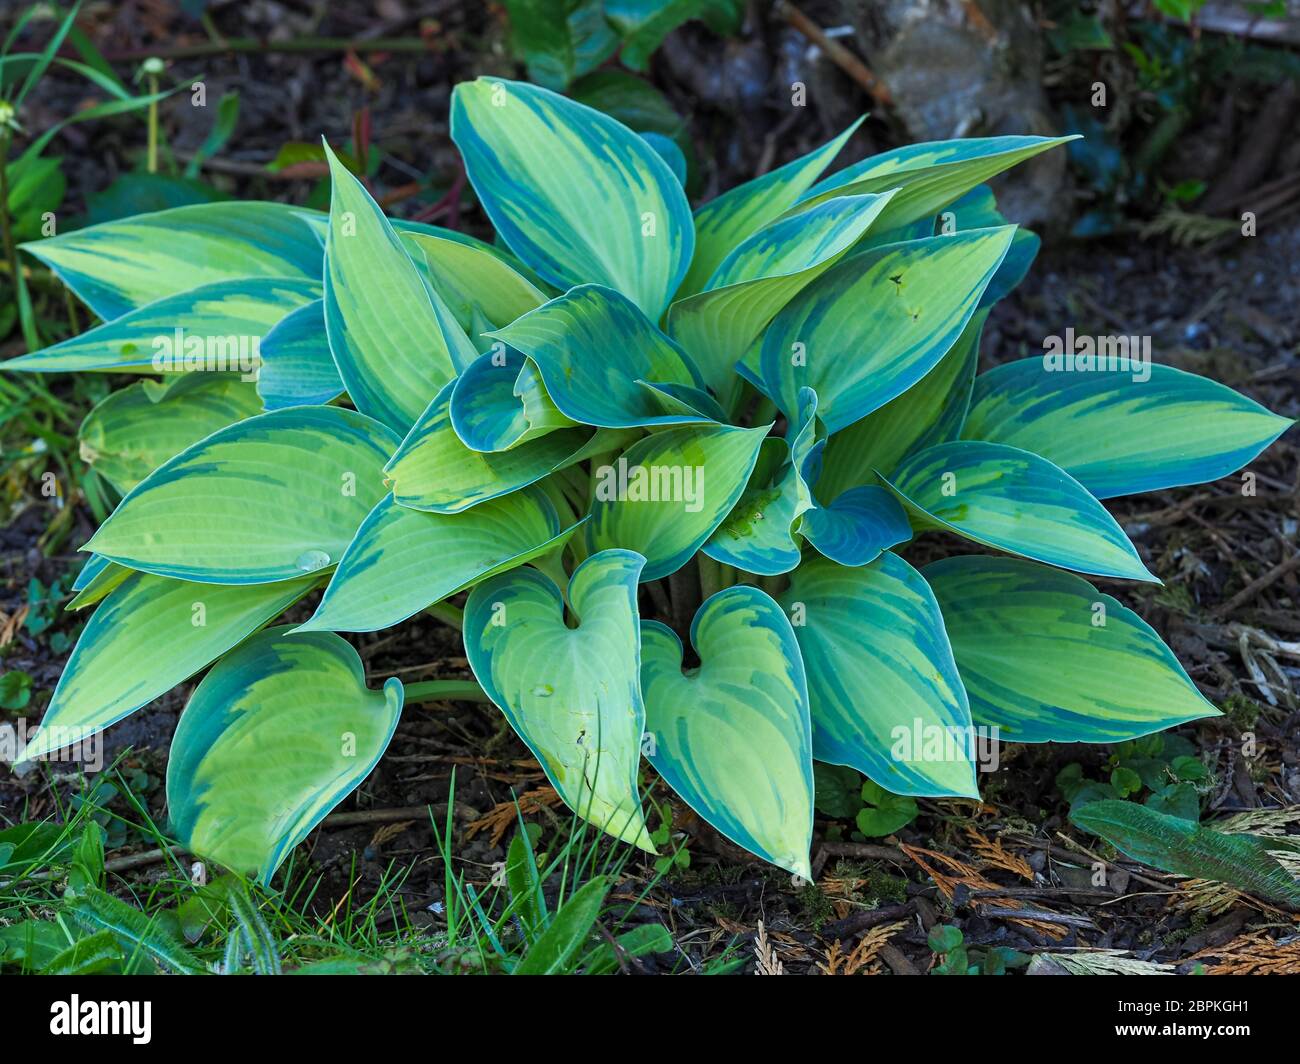 Hosta plant with colourful green and yellow variegated leaves growing in a garden Stock Photo